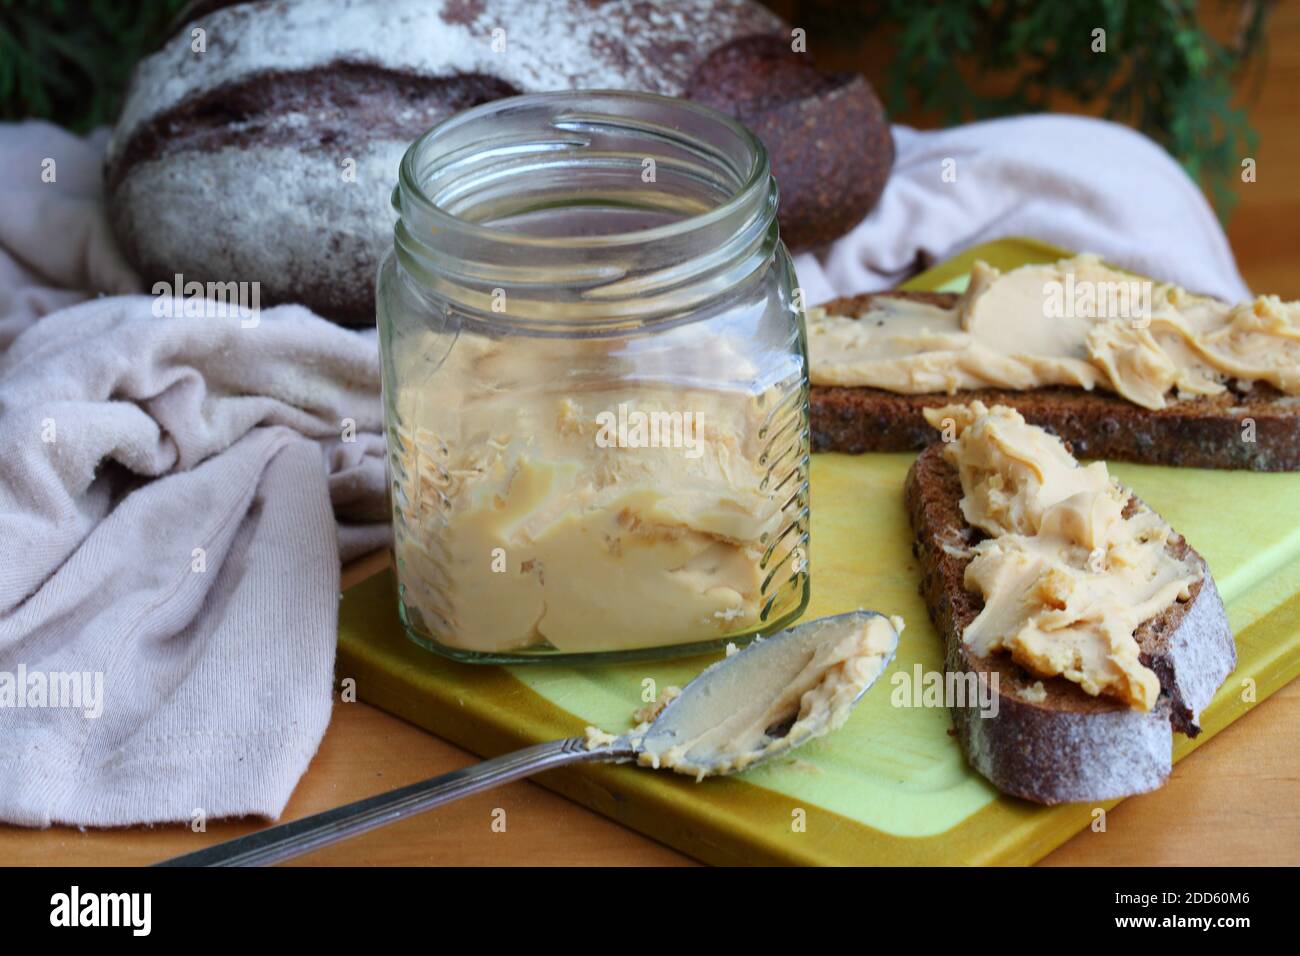 Brunost cheese with black bread and olives Stock Photo